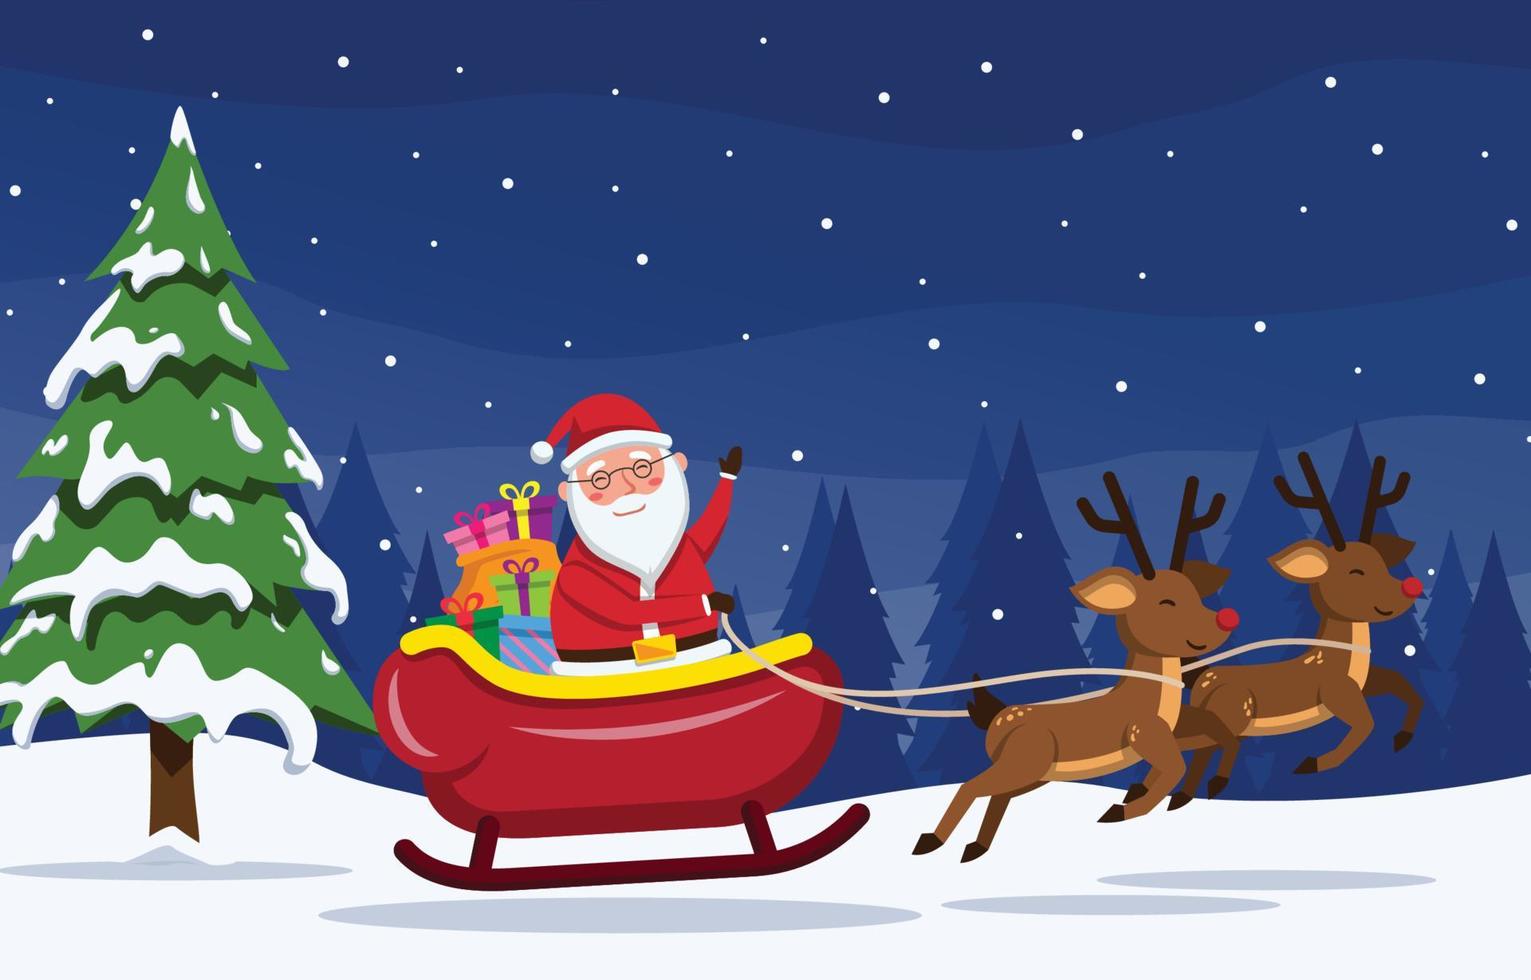 Santa Claus and the Reindeer Background vector